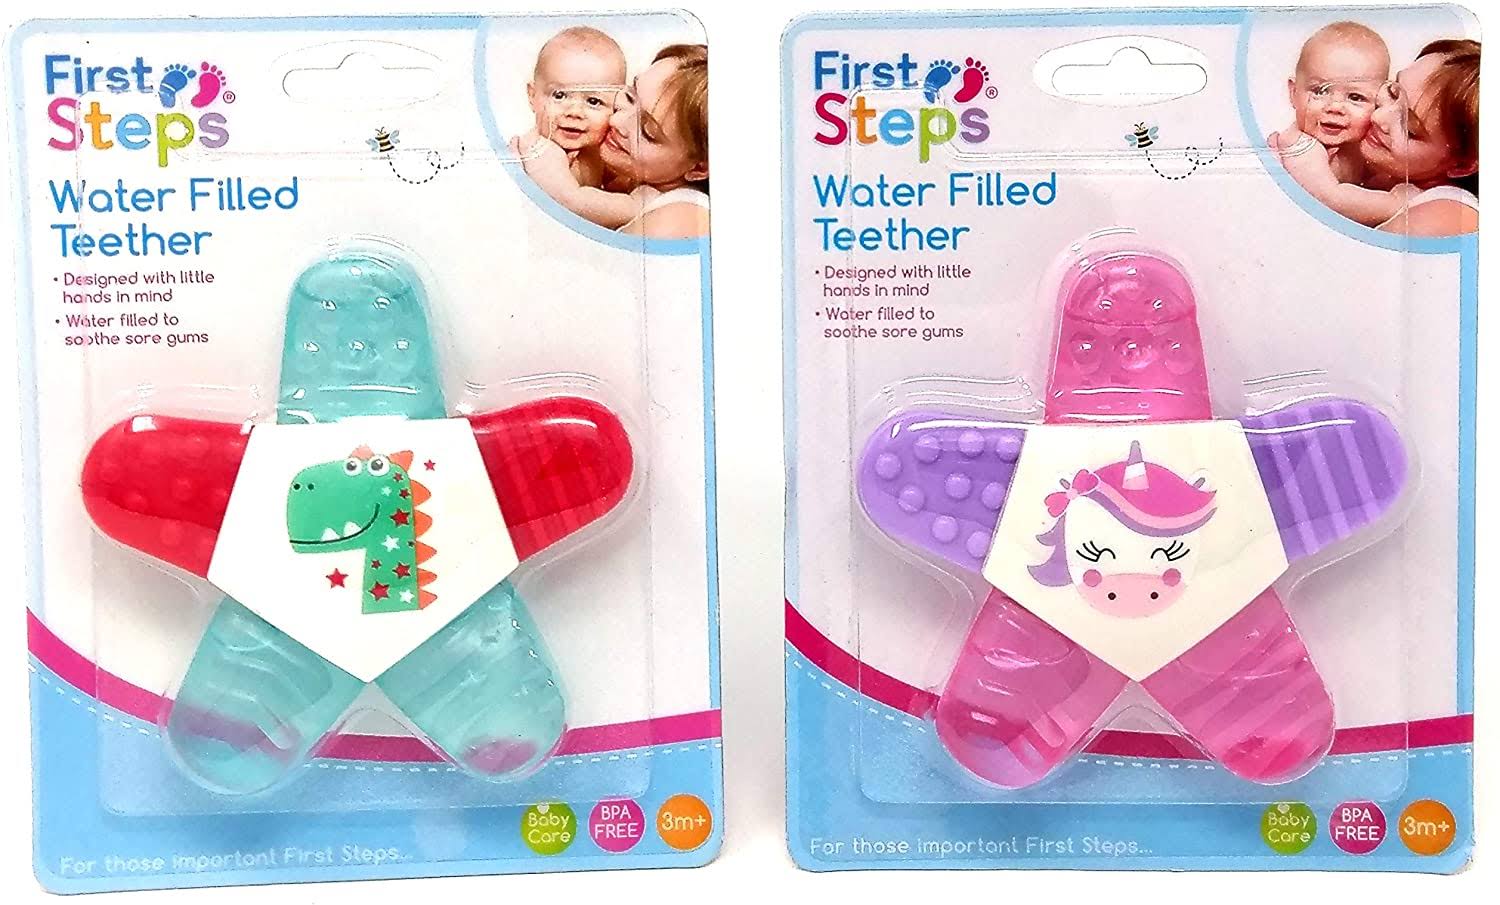 First Steps Water Filled Teether - 40g